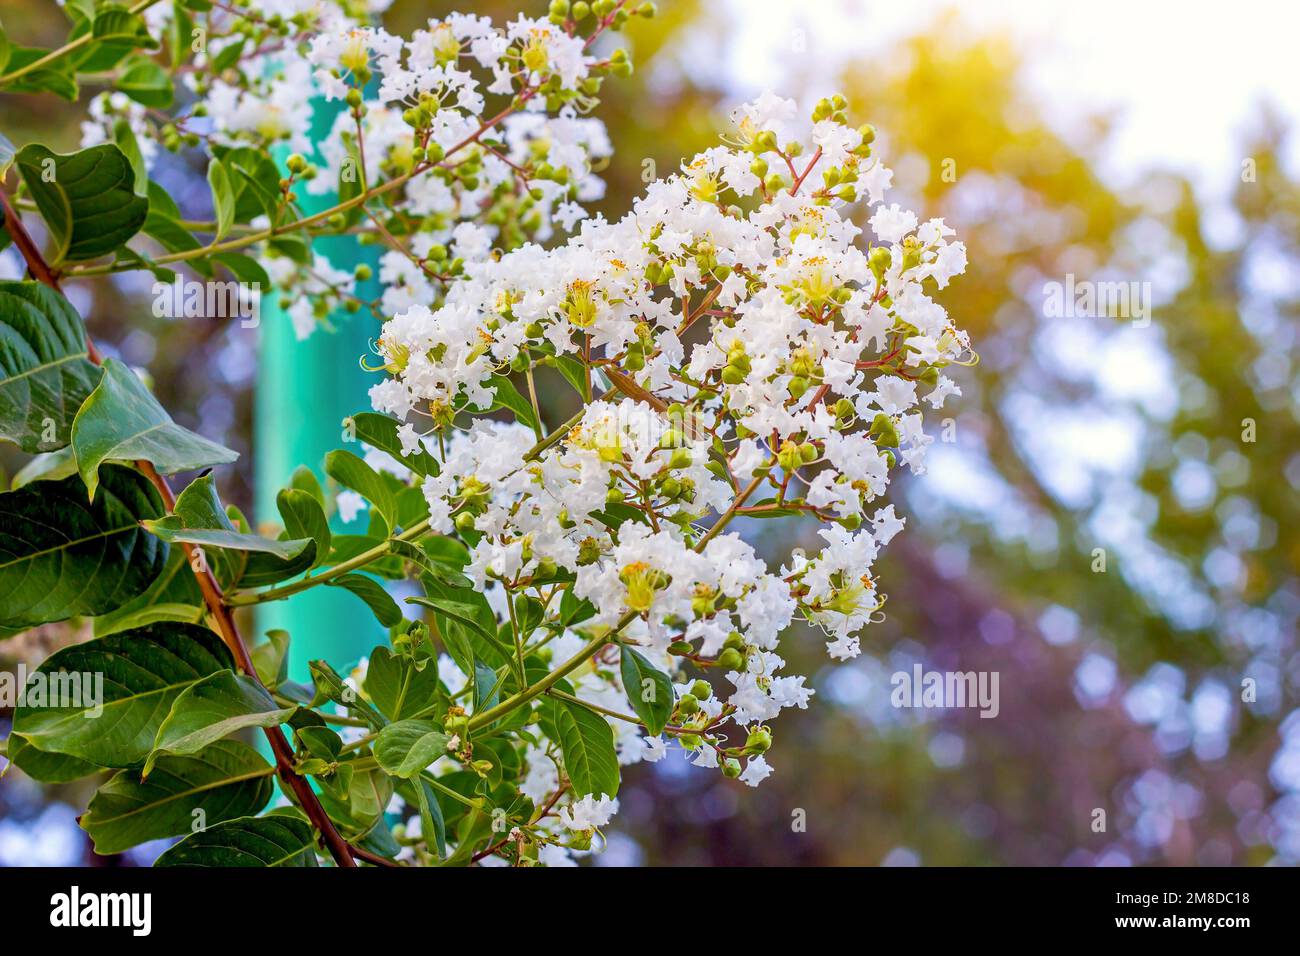 White Lagerstroemia Indica (Crape Myrtle) flowers with green leaves on branches in the garden in summer. Stock Photo